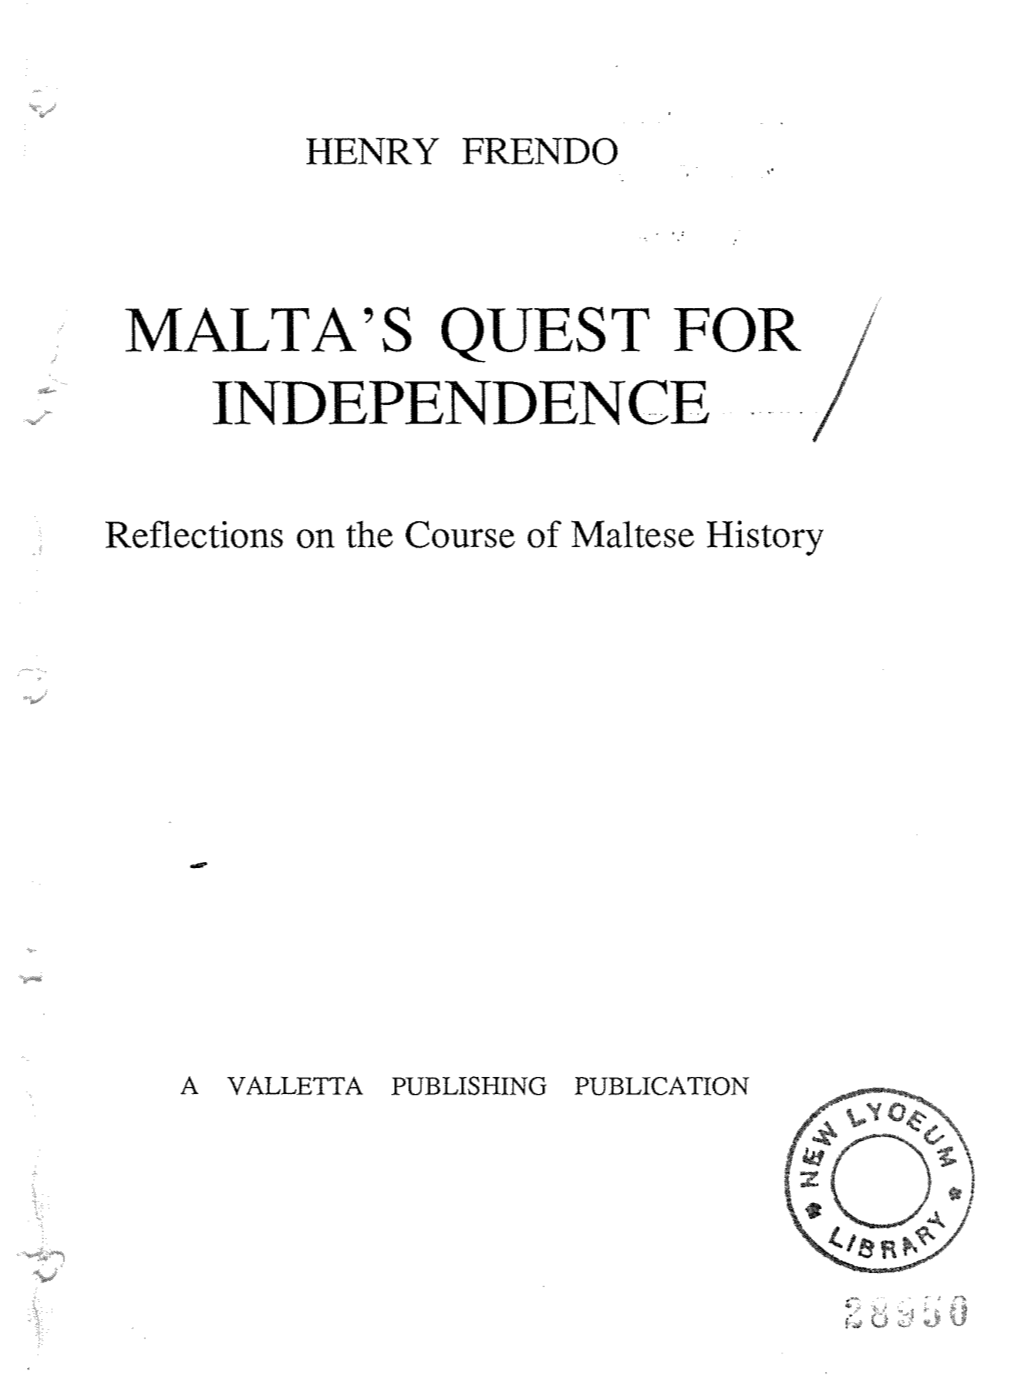 Malta's Quest for Independence